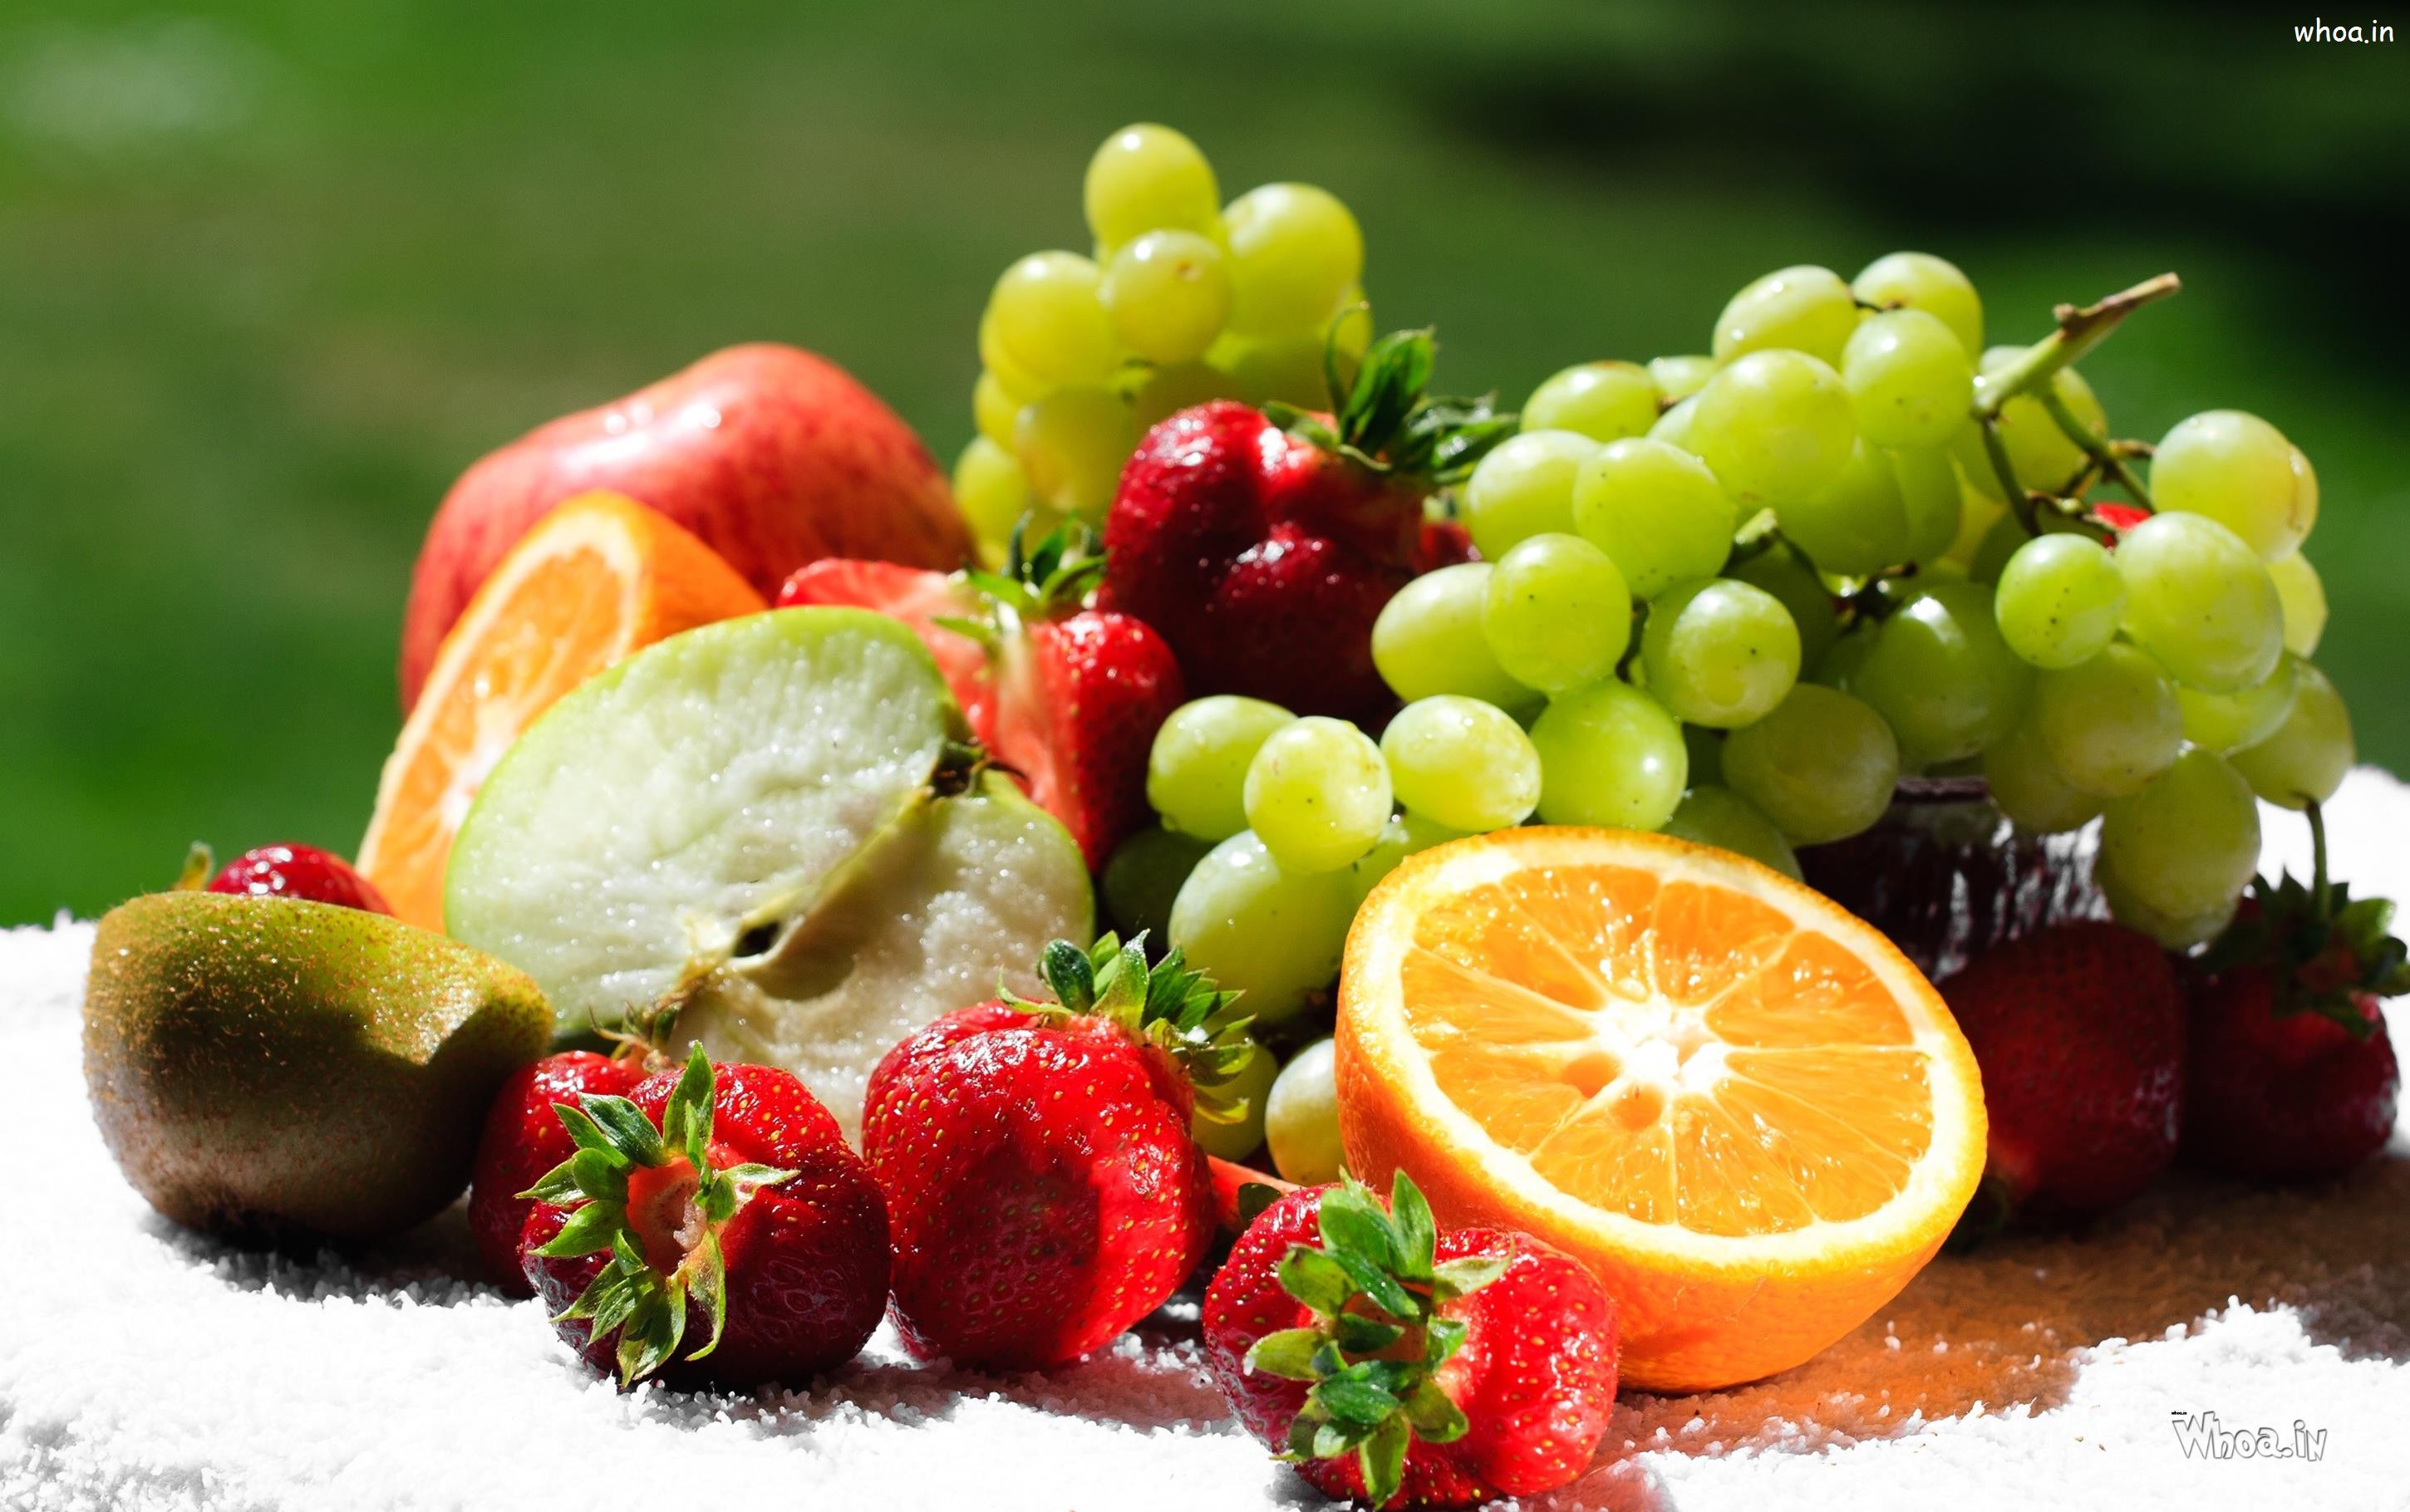 Fruits Wallpaper Free Fruits Background Download